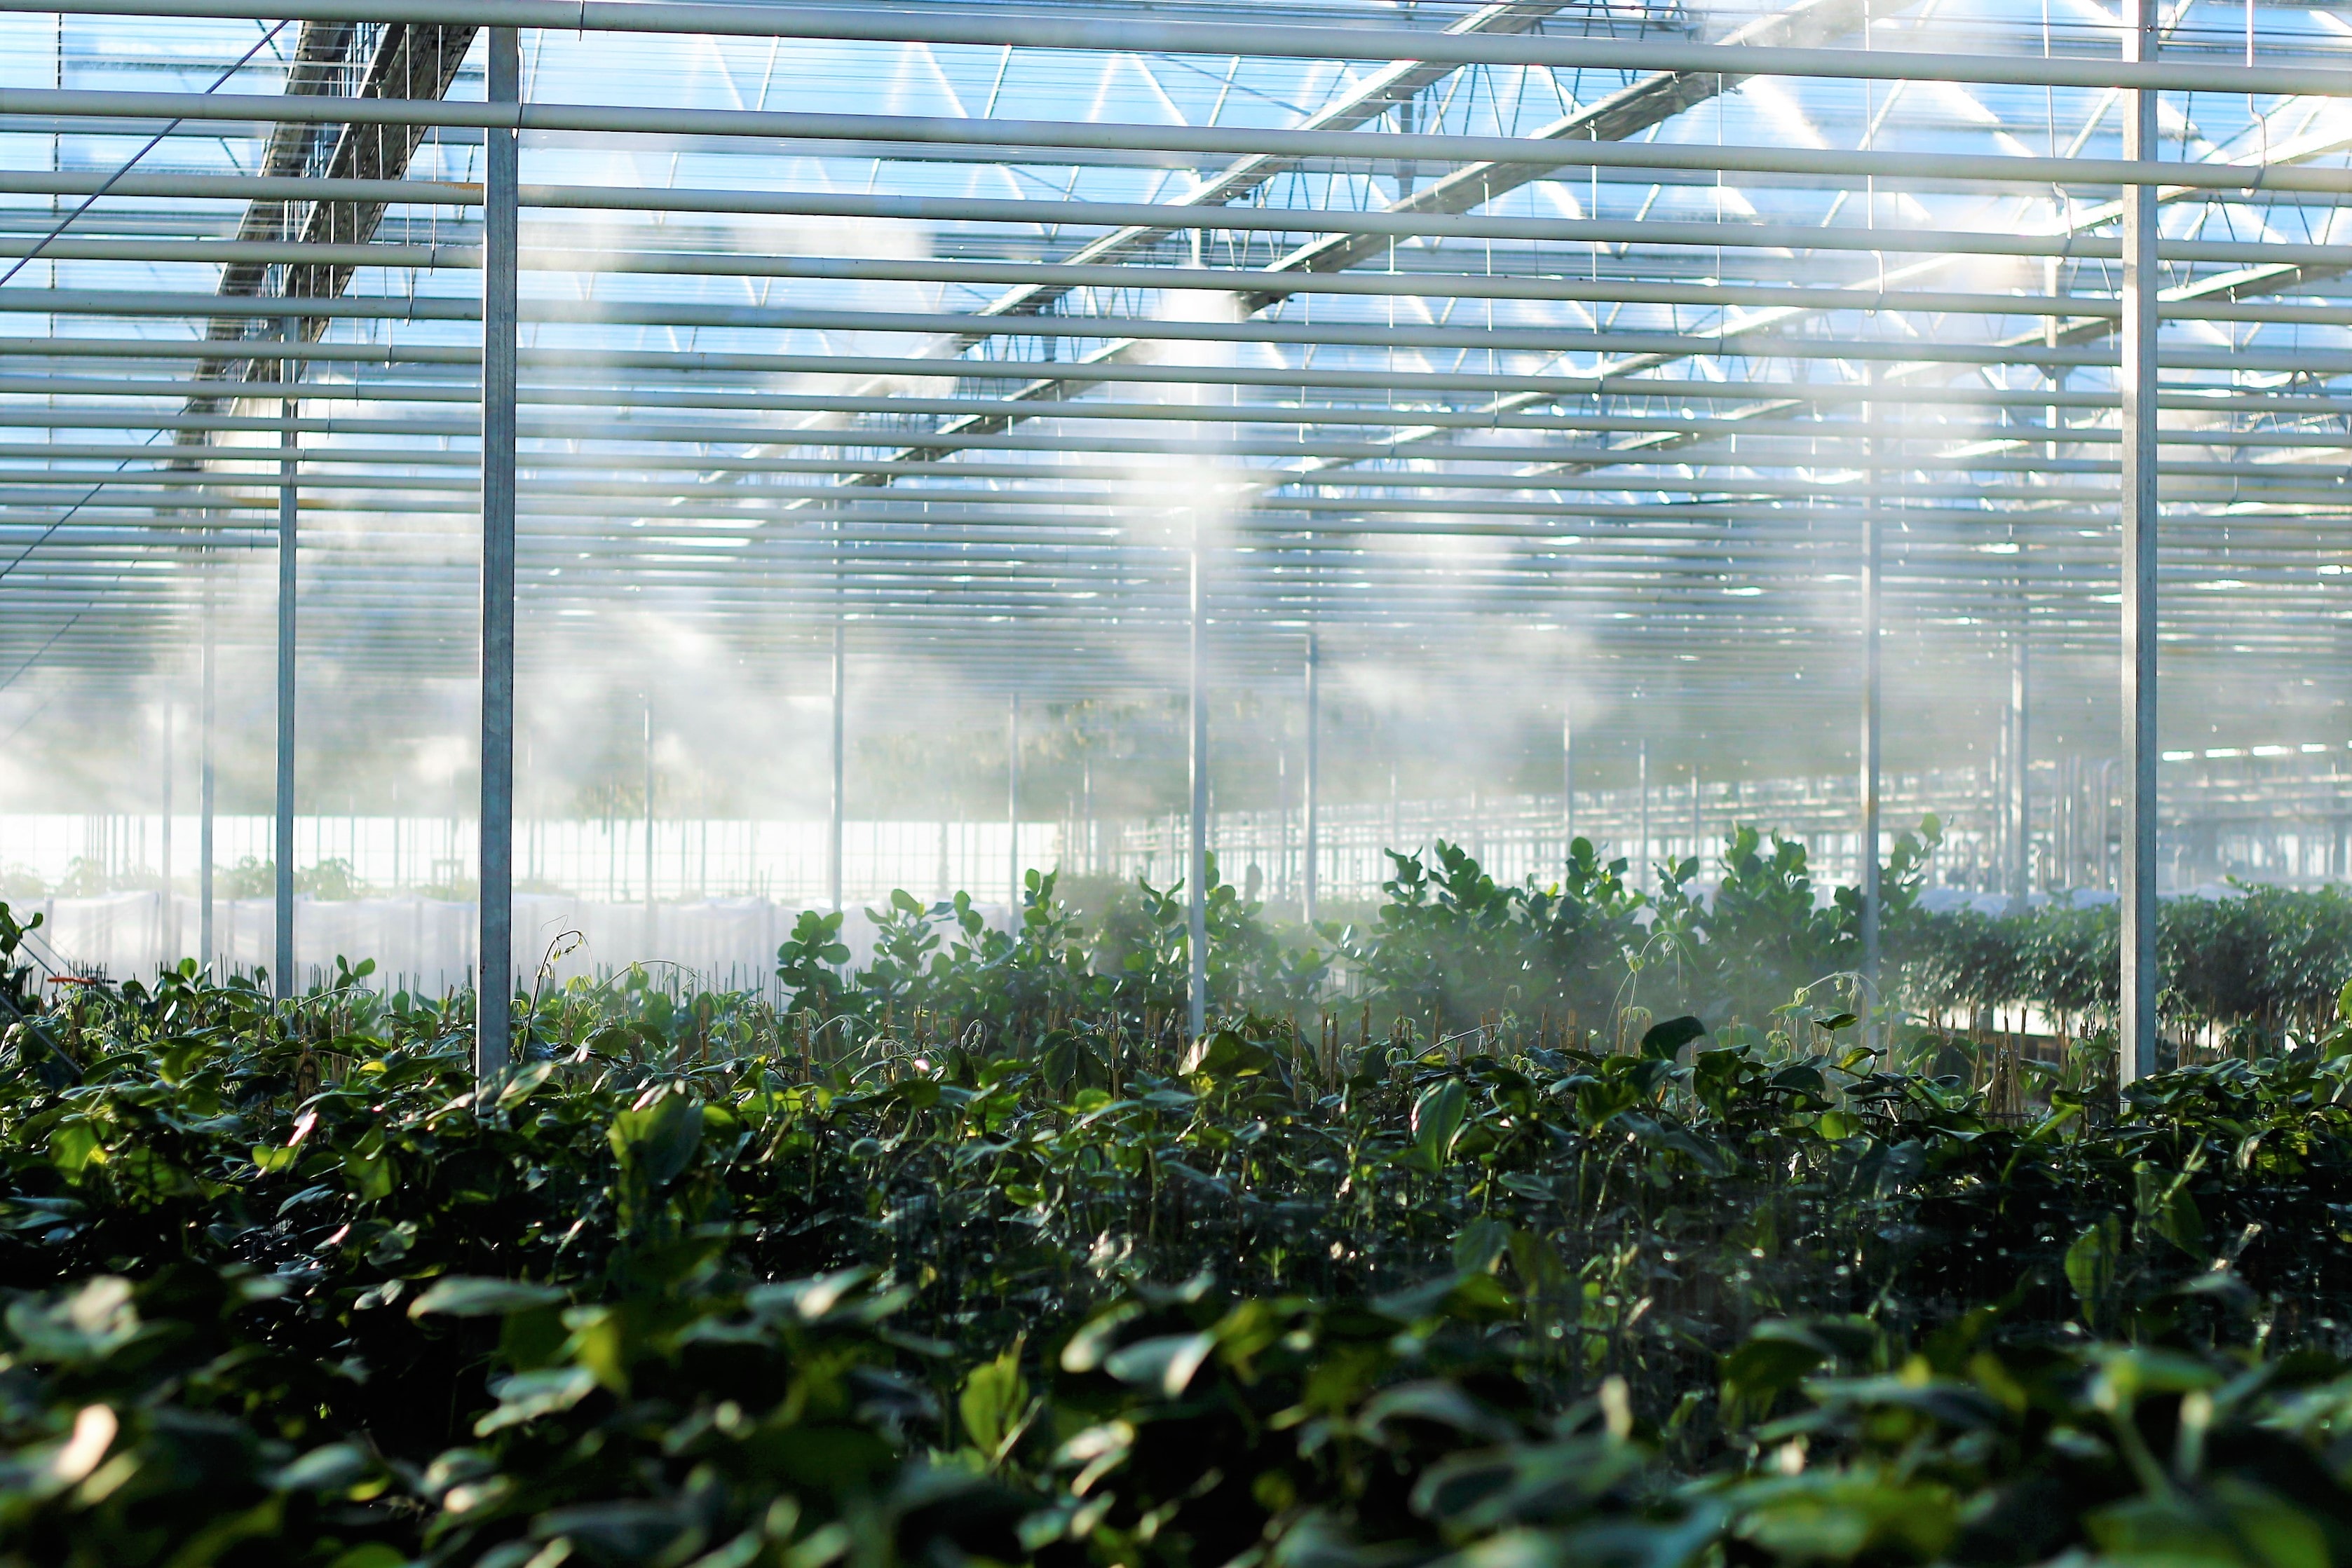 greenhouse growers should pay attention to vapor-pressure deficit and not relative humidity